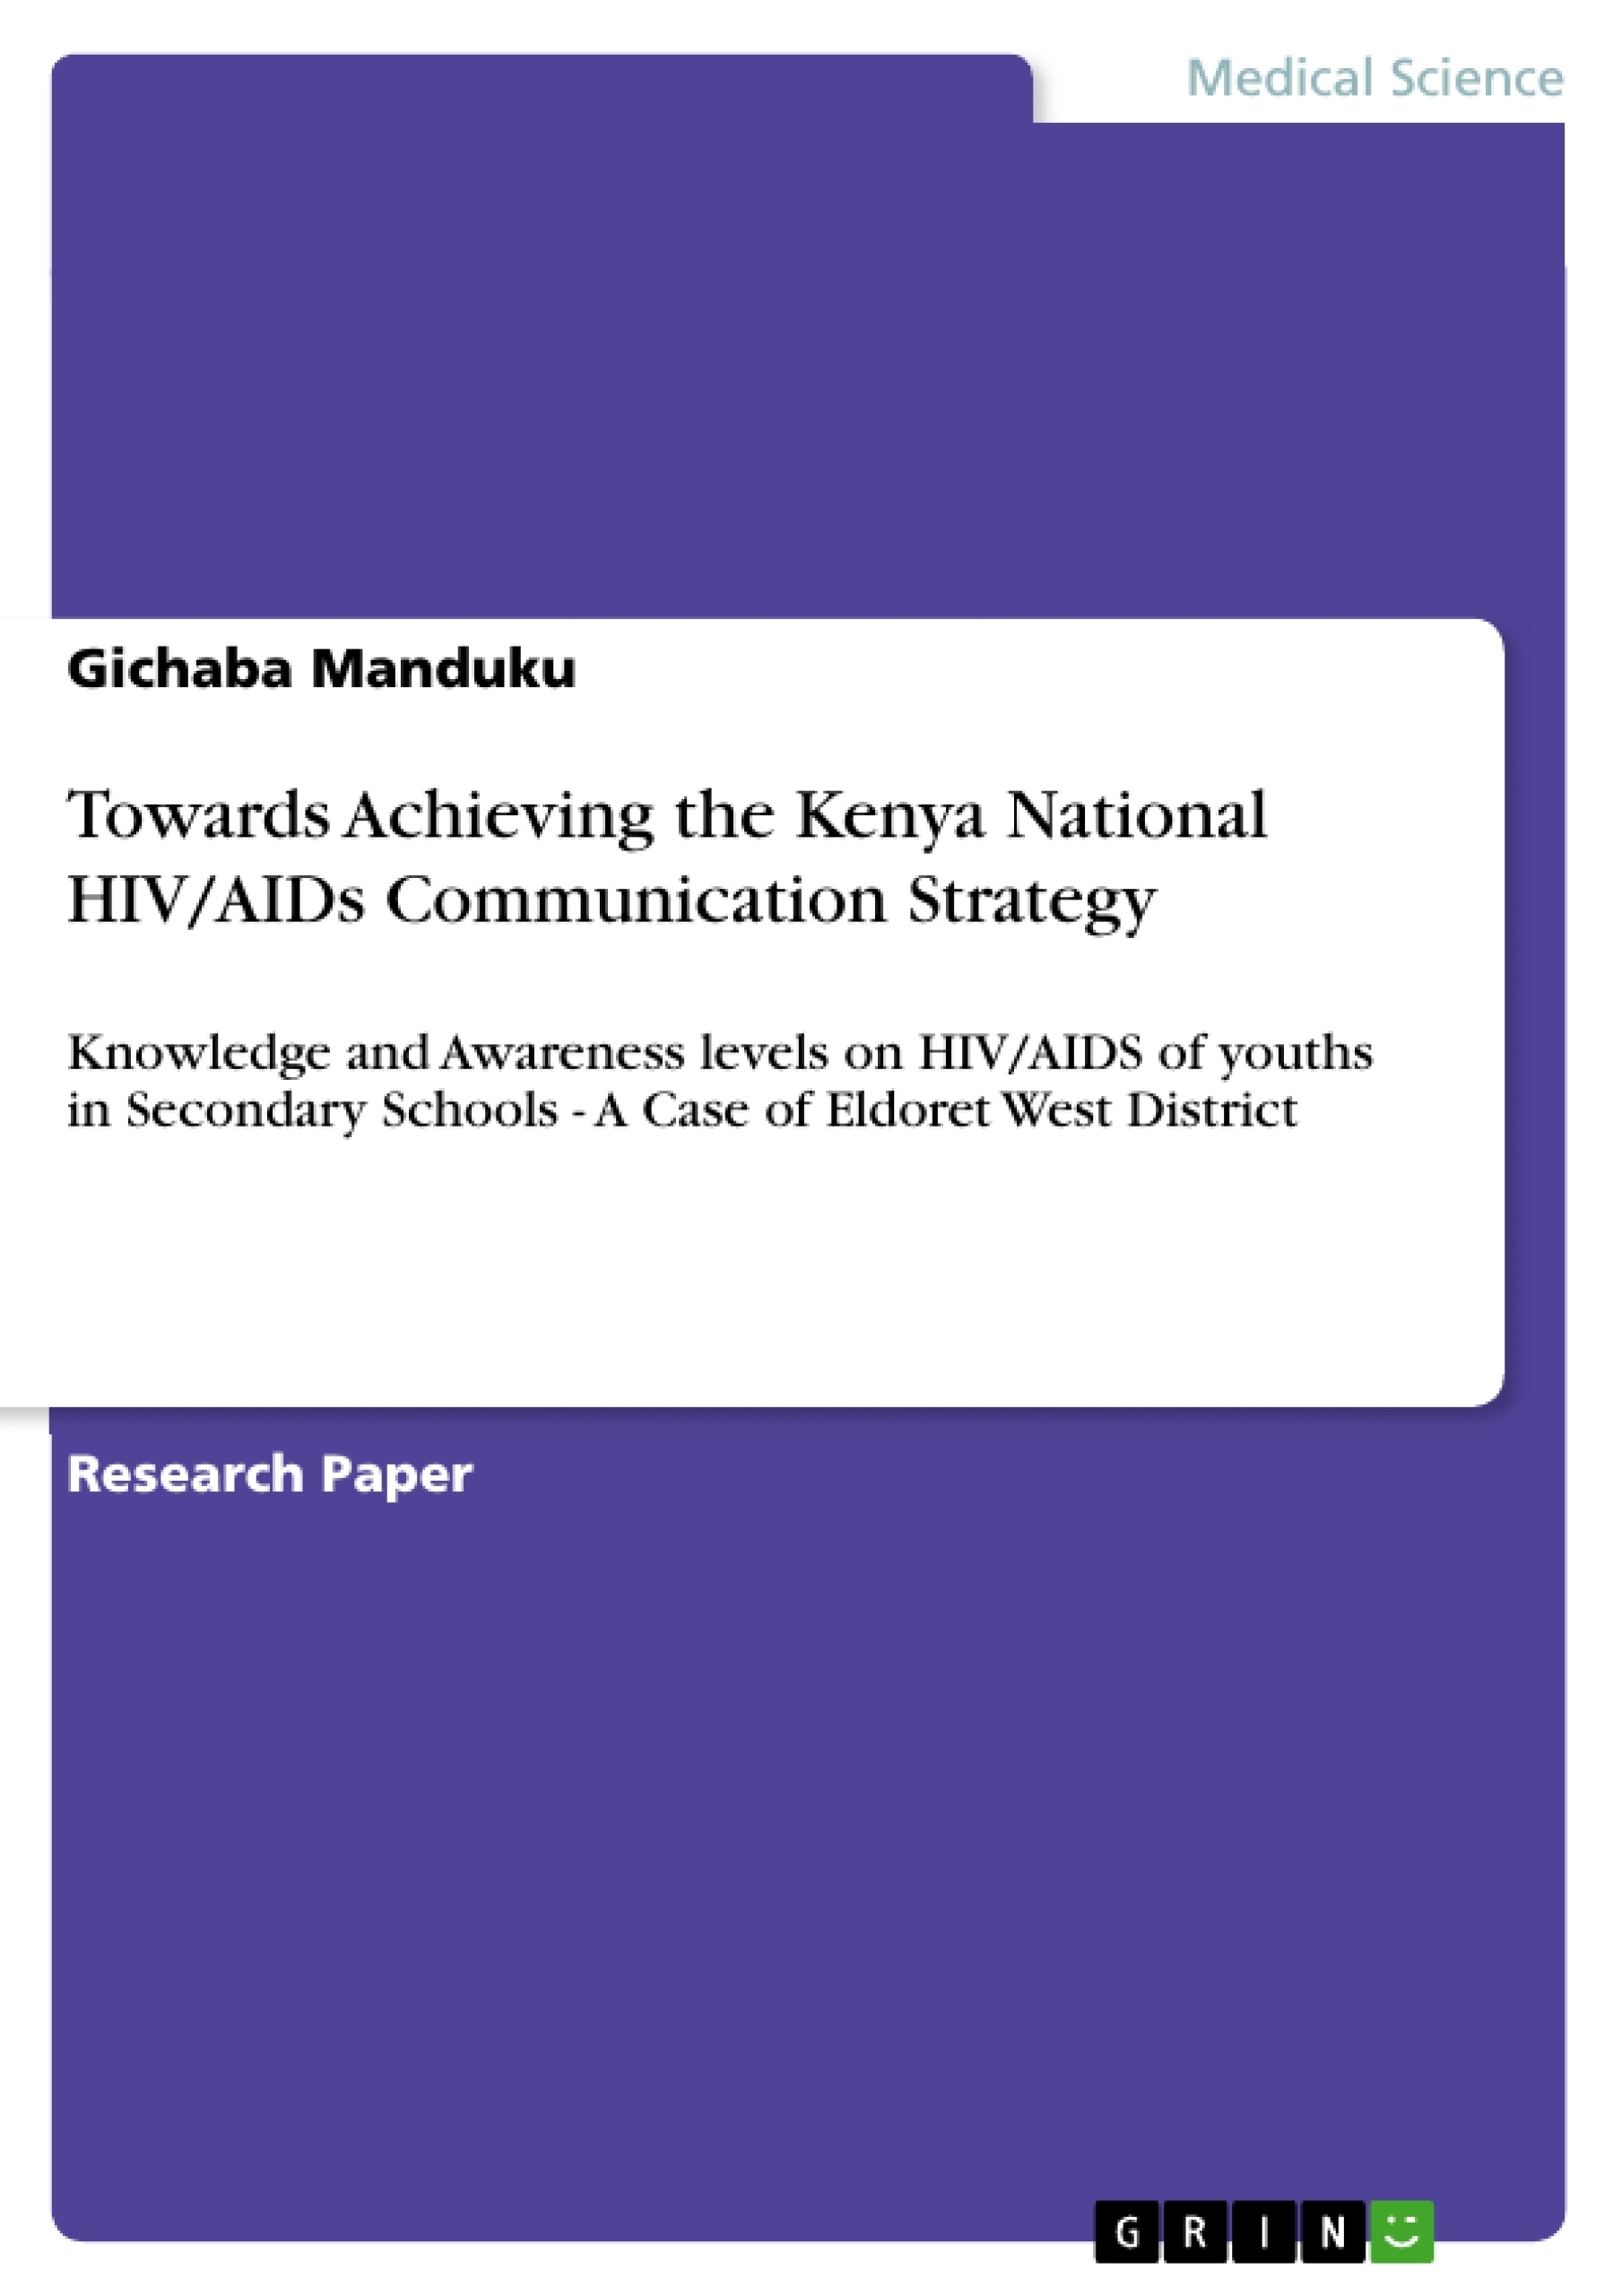 Title: Towards Achieving the Kenya National HIV/AIDs Communication Strategy